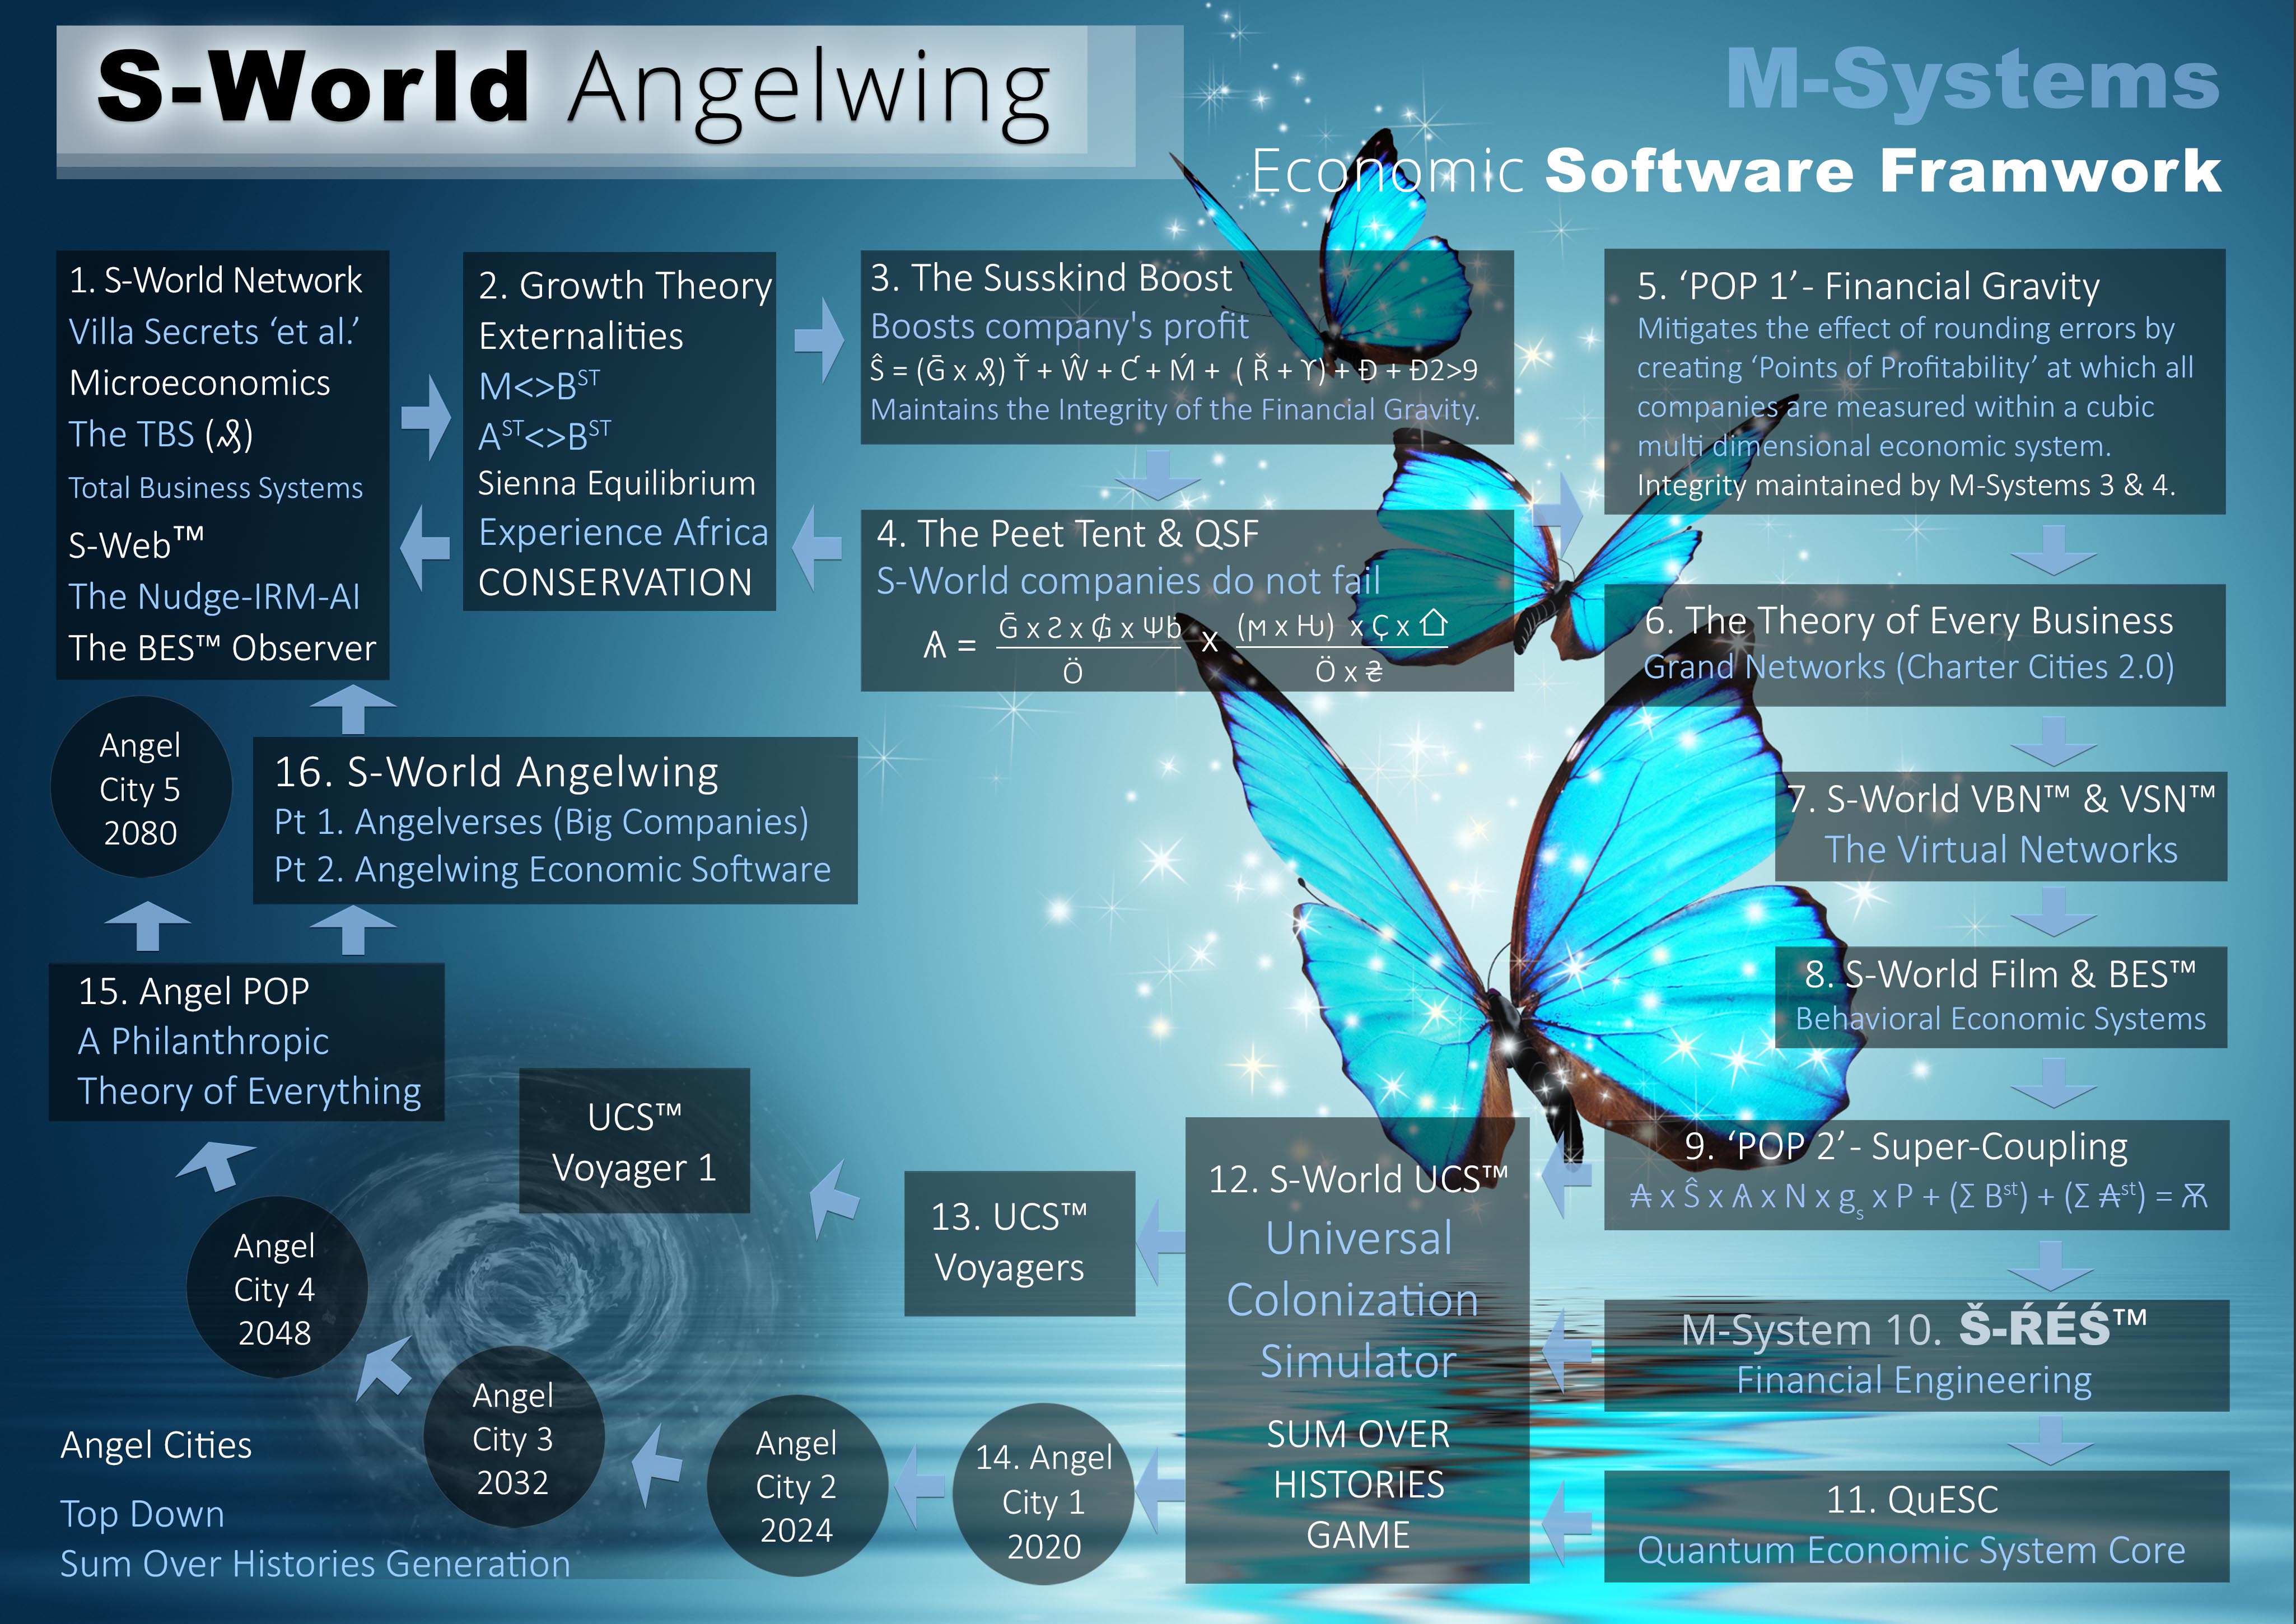 S-World-Angelwing__Supereconomics__Economics-Software-Framwork--Butterfly-Background__7.05__(22nd-March-2020)